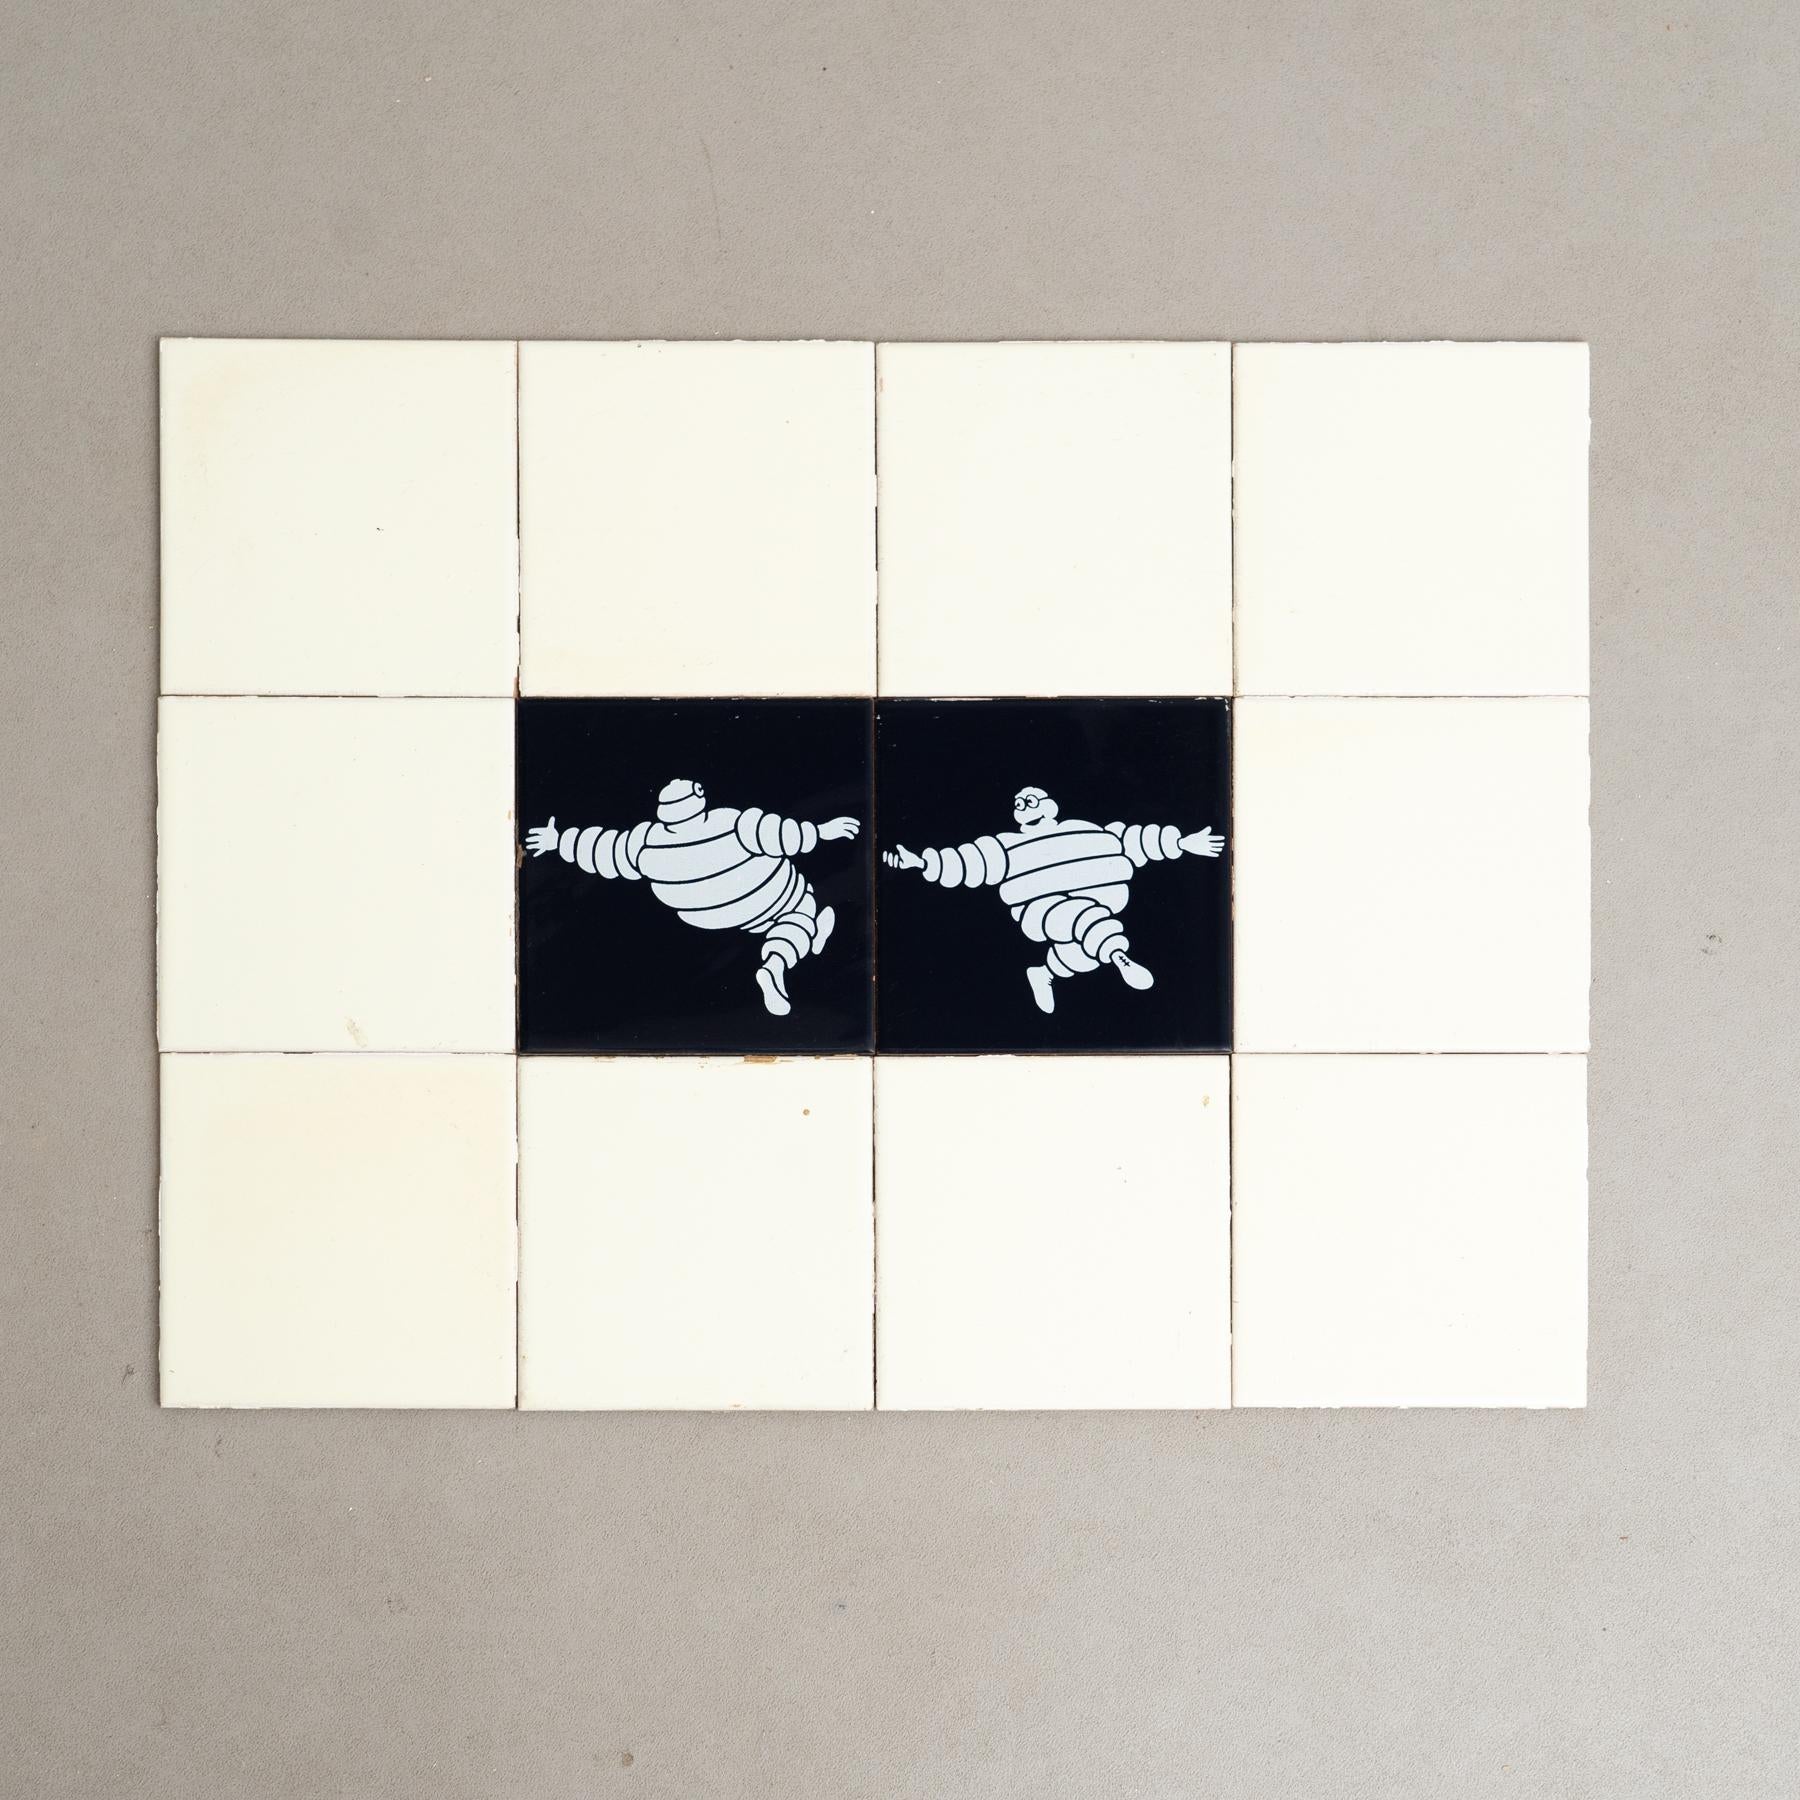 Embark on a journey of vintage charm with this exceptional set of tiles, featuring the iconic Michelin Man in a vibrant blue centerpiece, surrounded by original yellow tiles. Crafted by an unknown manufacturer in Spain circa 1960, this set is a